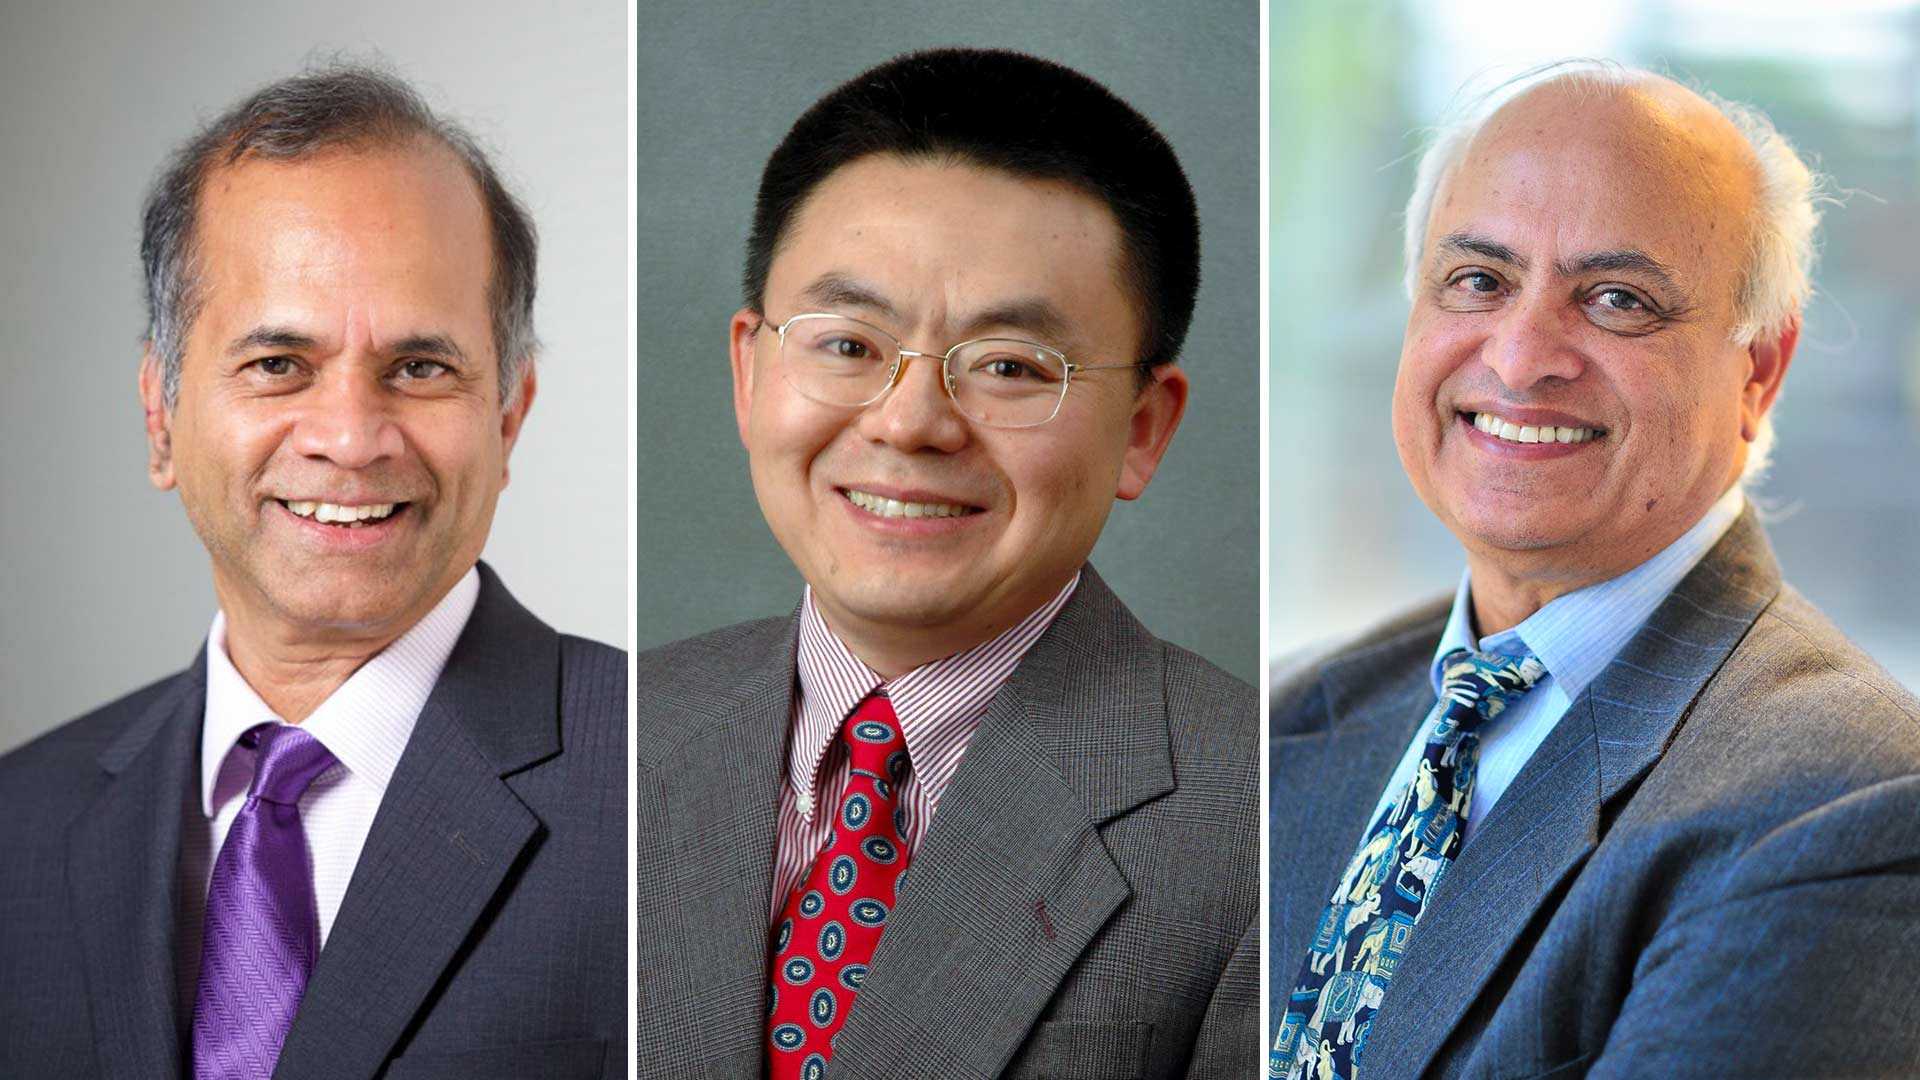 The election of engineering professors, from left, Rama Chellappa, Ji-Cheng “JC” Zhao and Inderjit Chopra to the National Academy of Engineering boosts the number of UMD faculty in the national academies to 67.